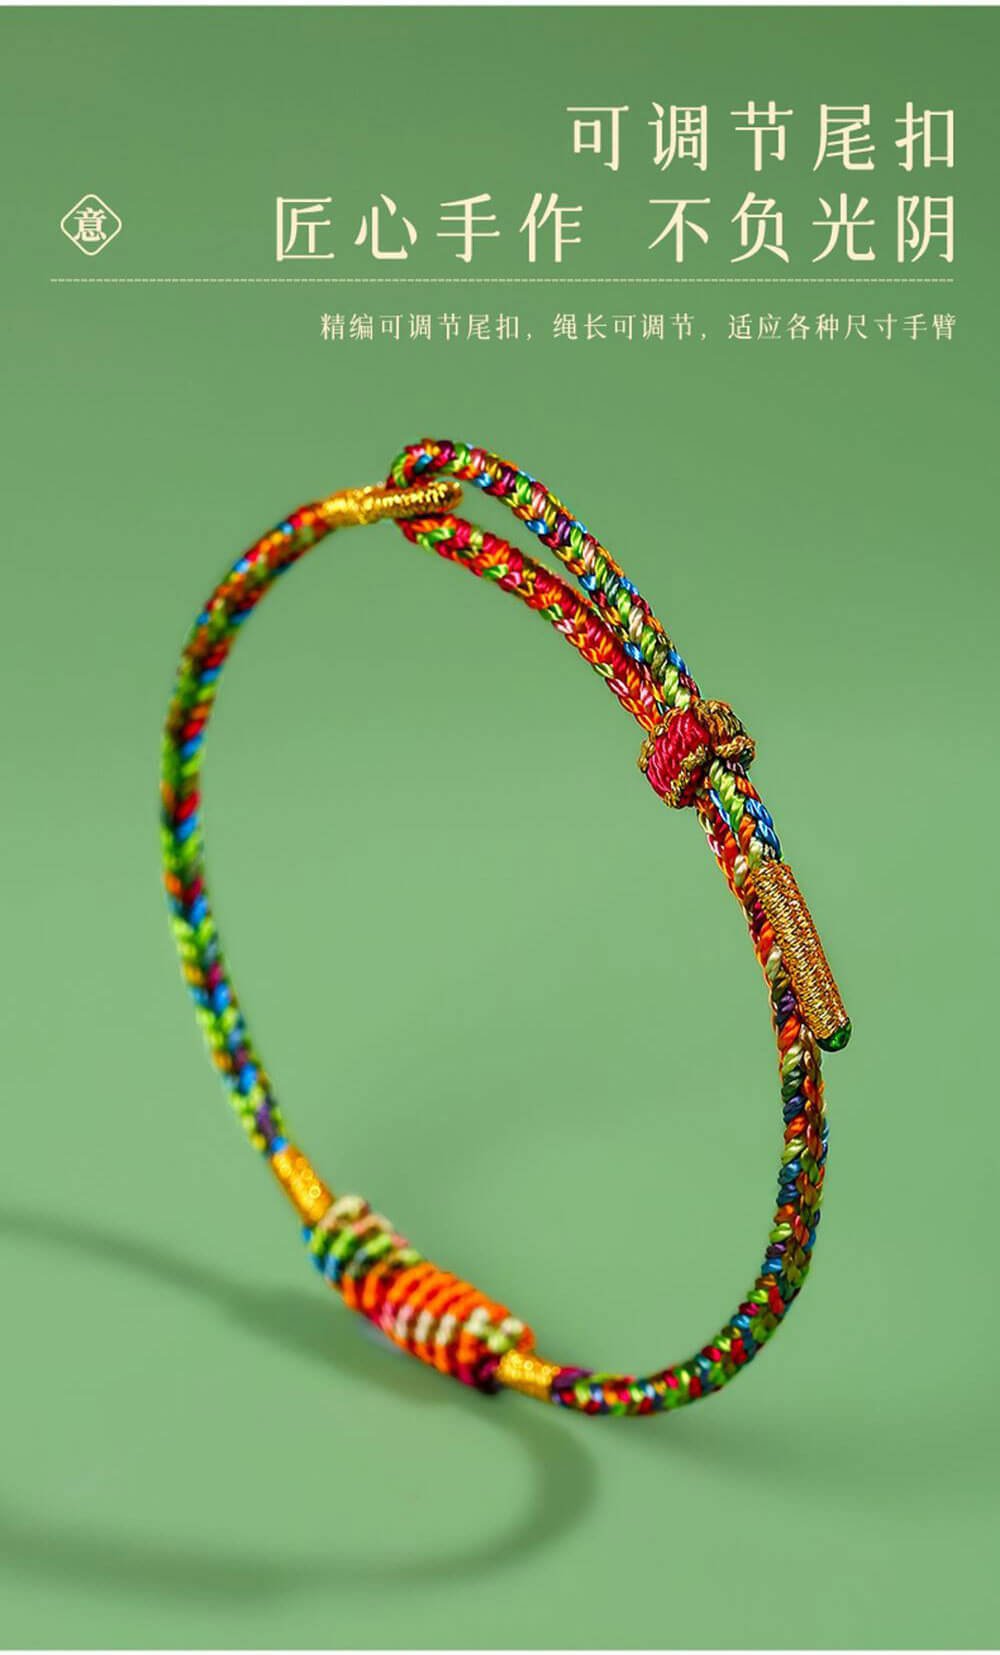 《Dragon Boat Festival Rainbow Rope》 Traditional Handwoven Multicolored Rope for Dragon Boat Festival